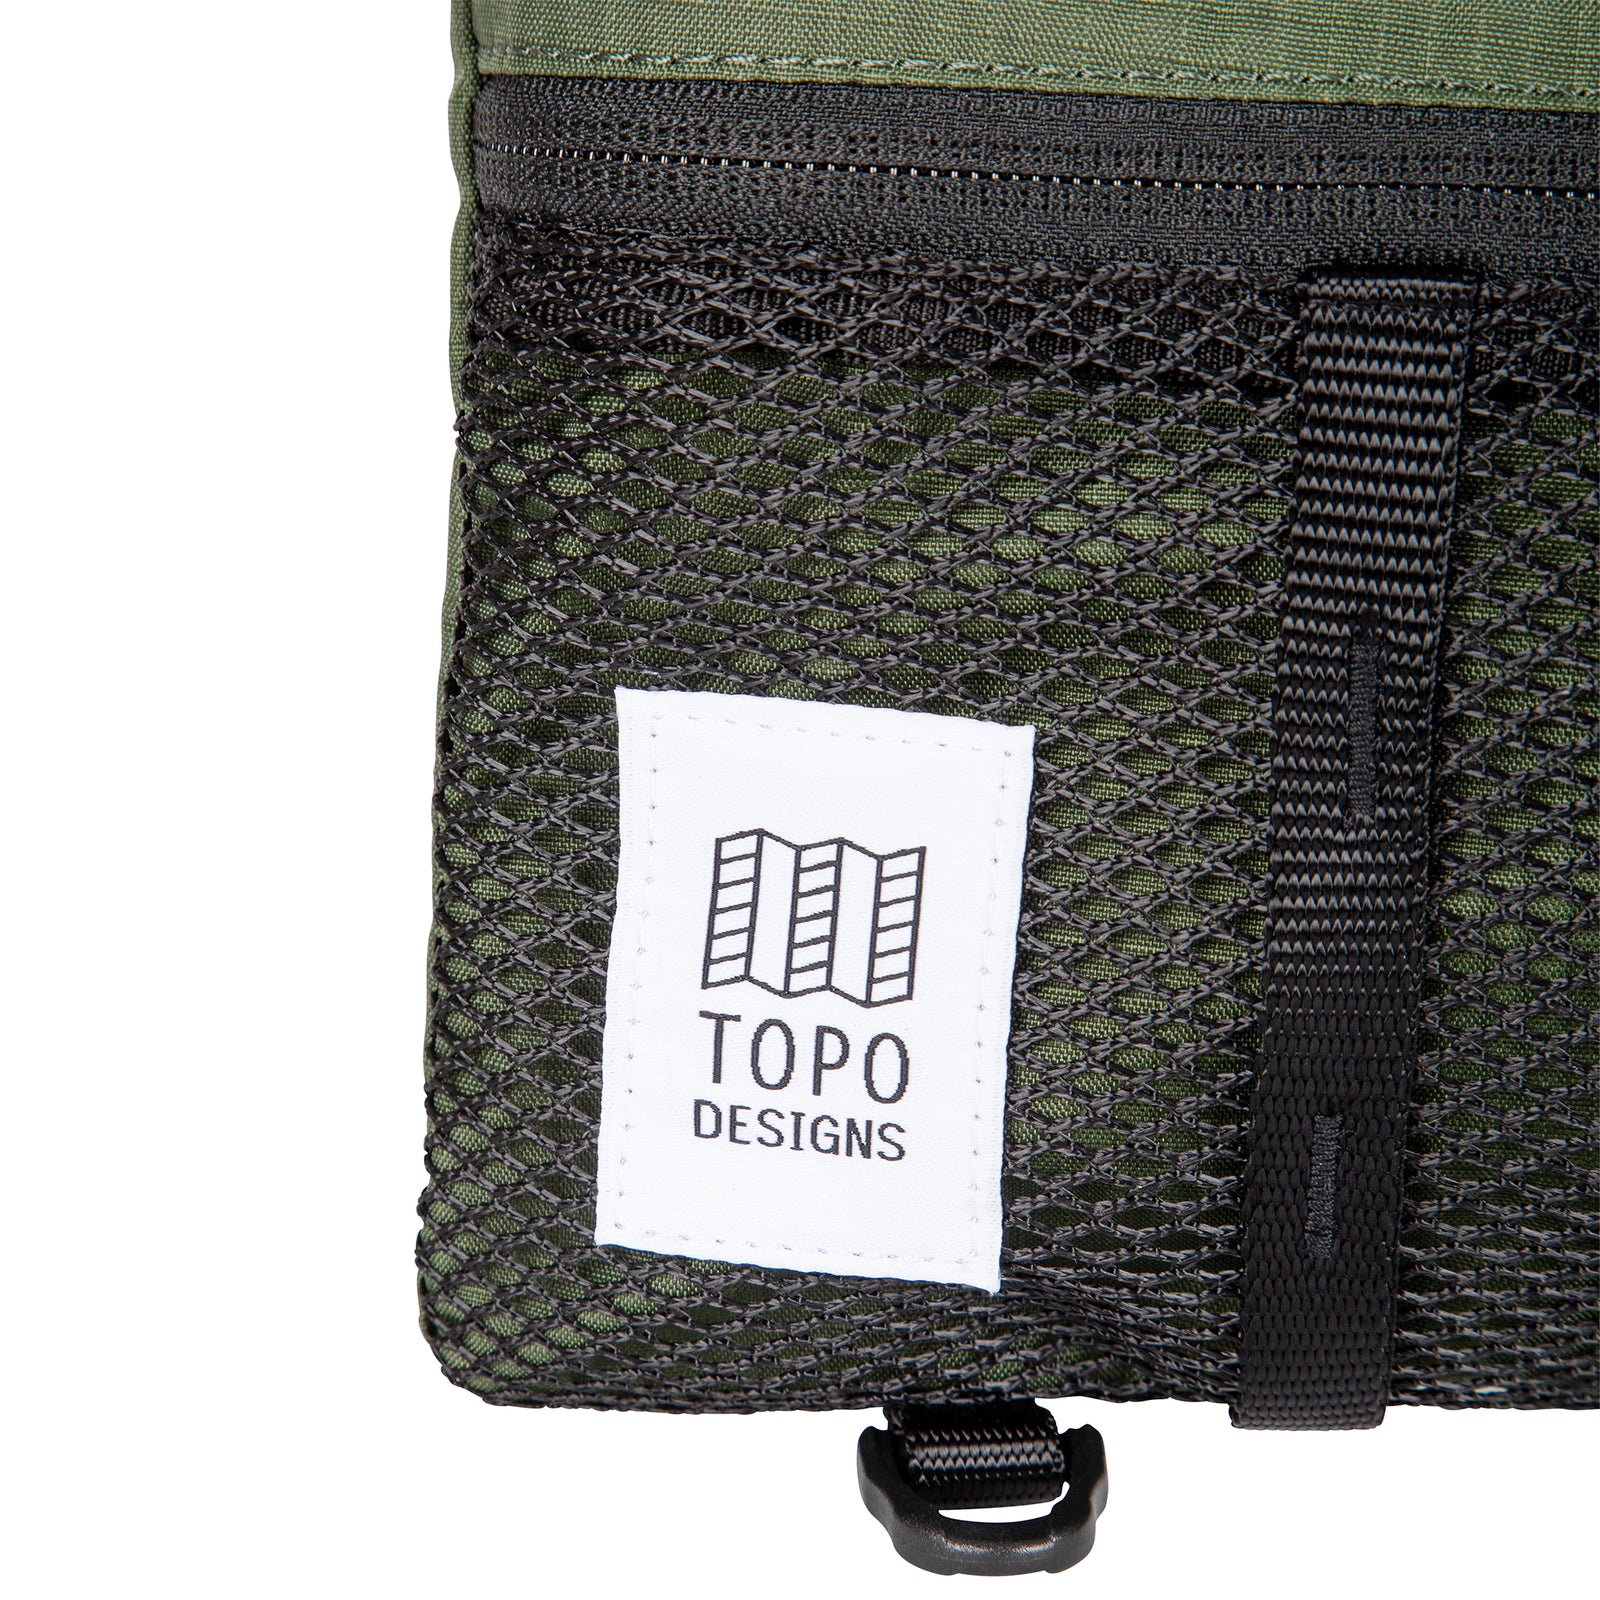 General shot of Topo Designs Mountain Accessory crossbody Shoulder Bag in olive green showing label up close.